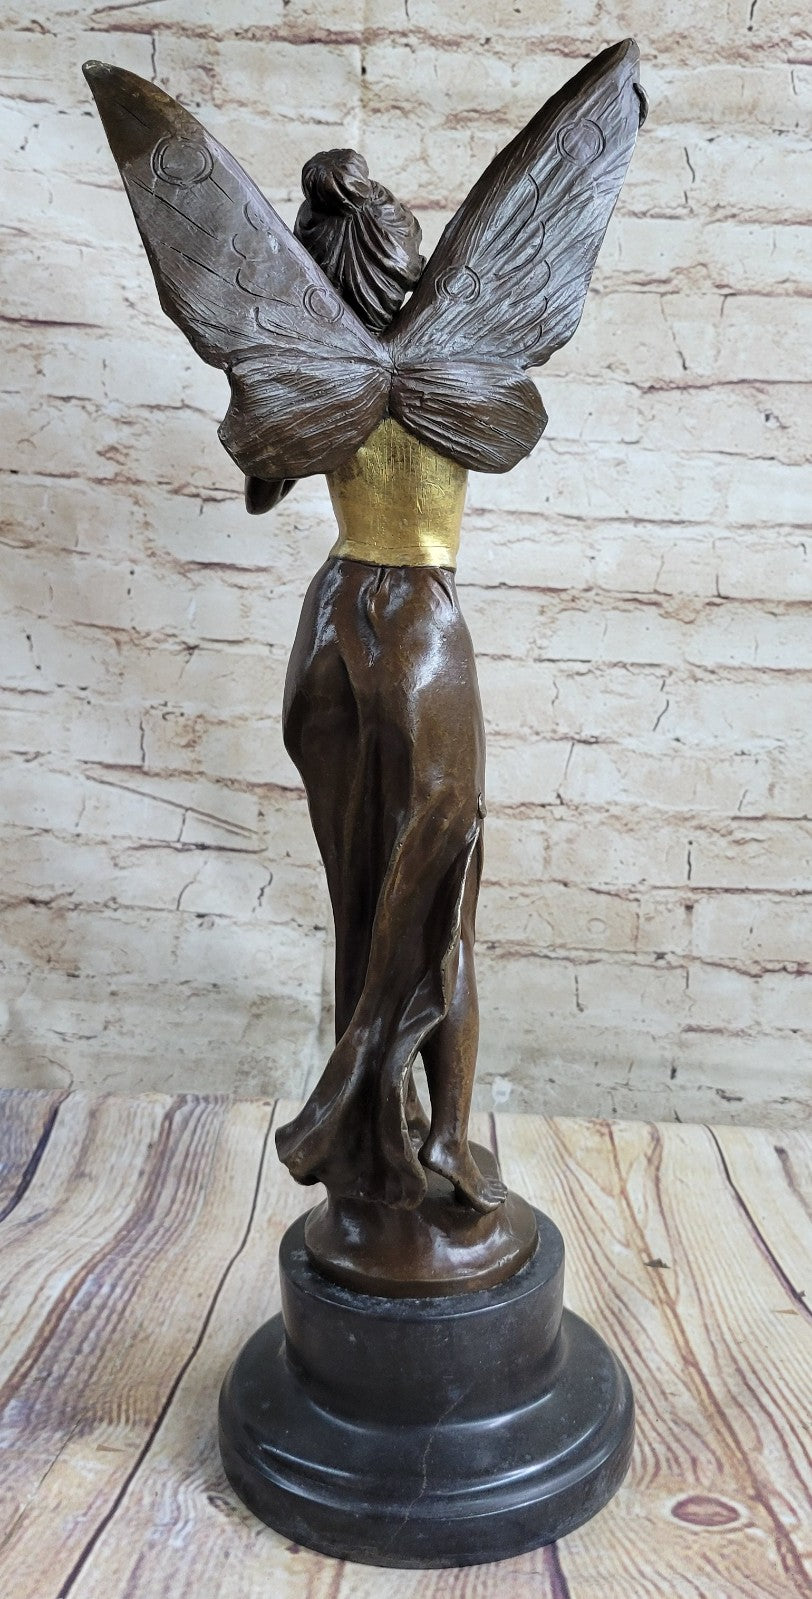 Handcrafted bronze sculpture SALE Standing Angel Charming Large French Signed